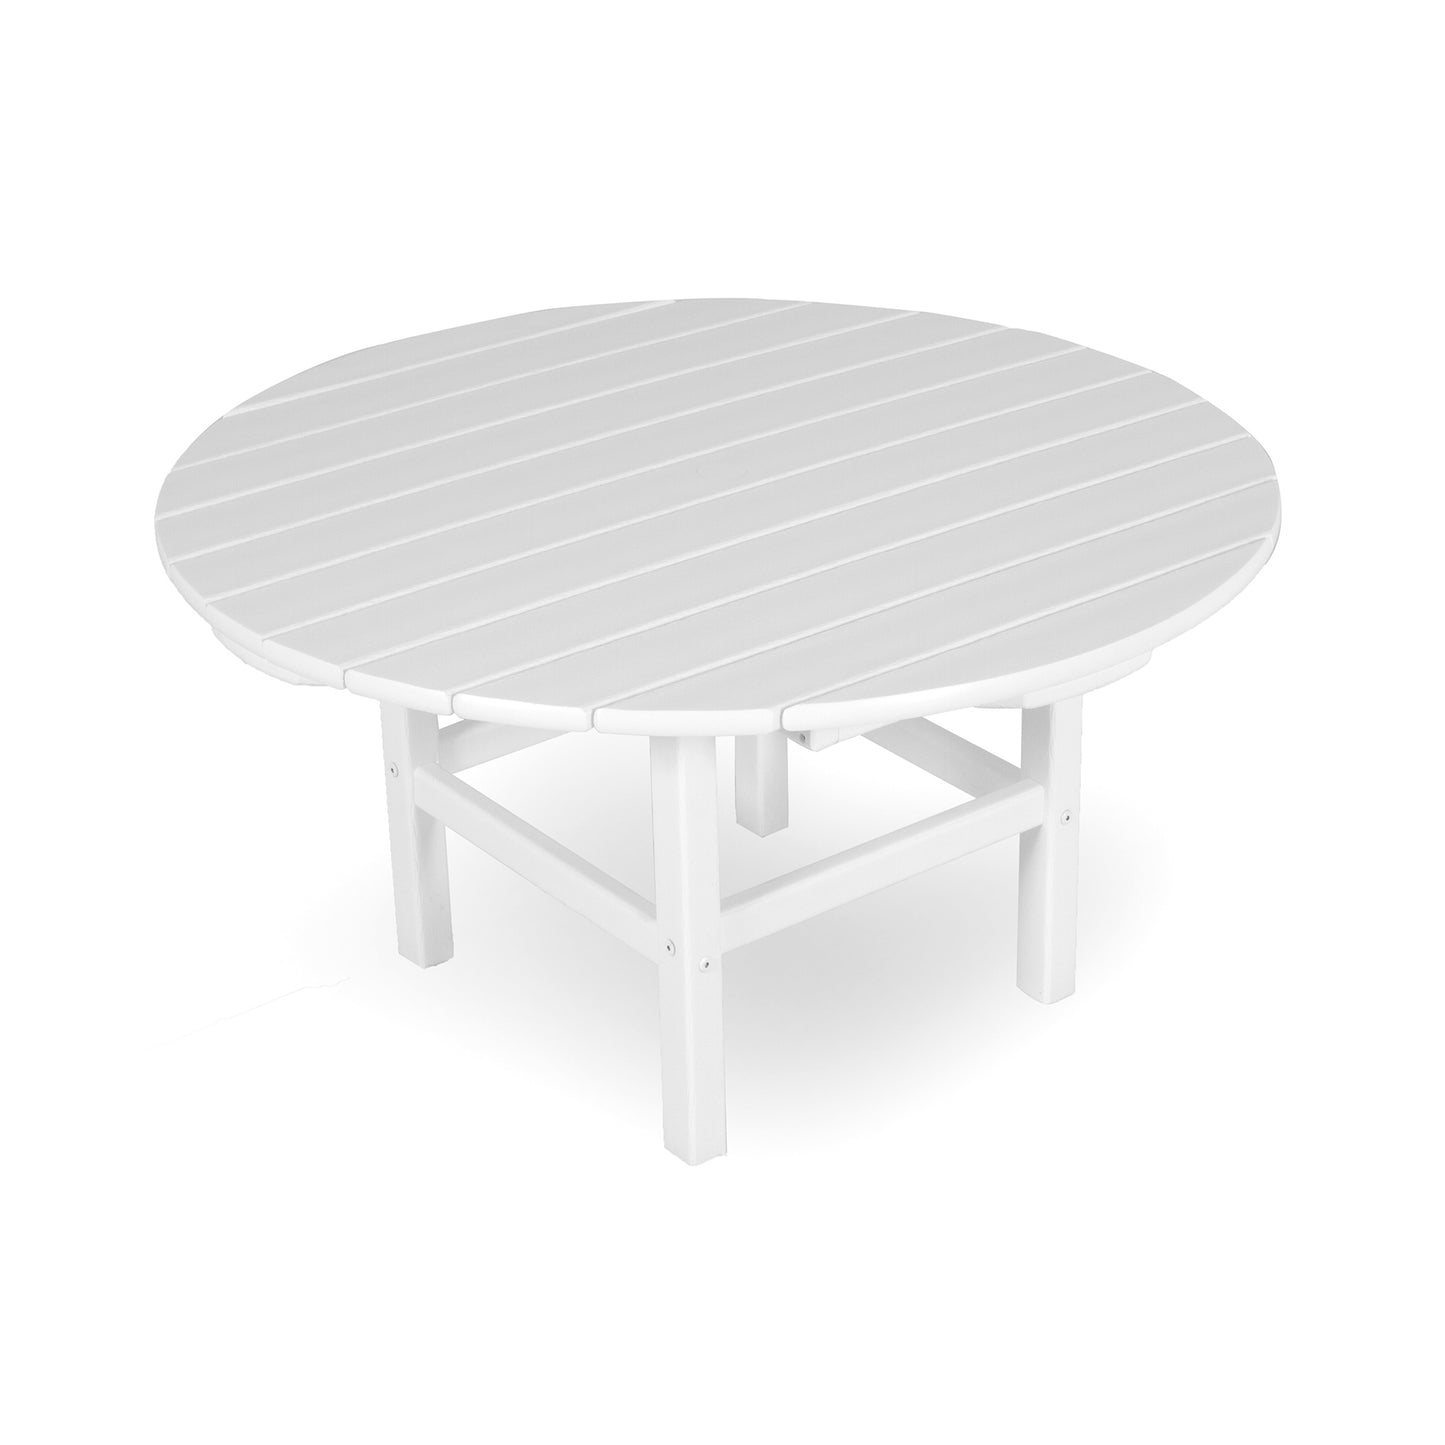 A round, white POLYWOOD® Outdoor 38" Conversation Table with horizontal slatted top and sturdy legs, set against a plain white background.